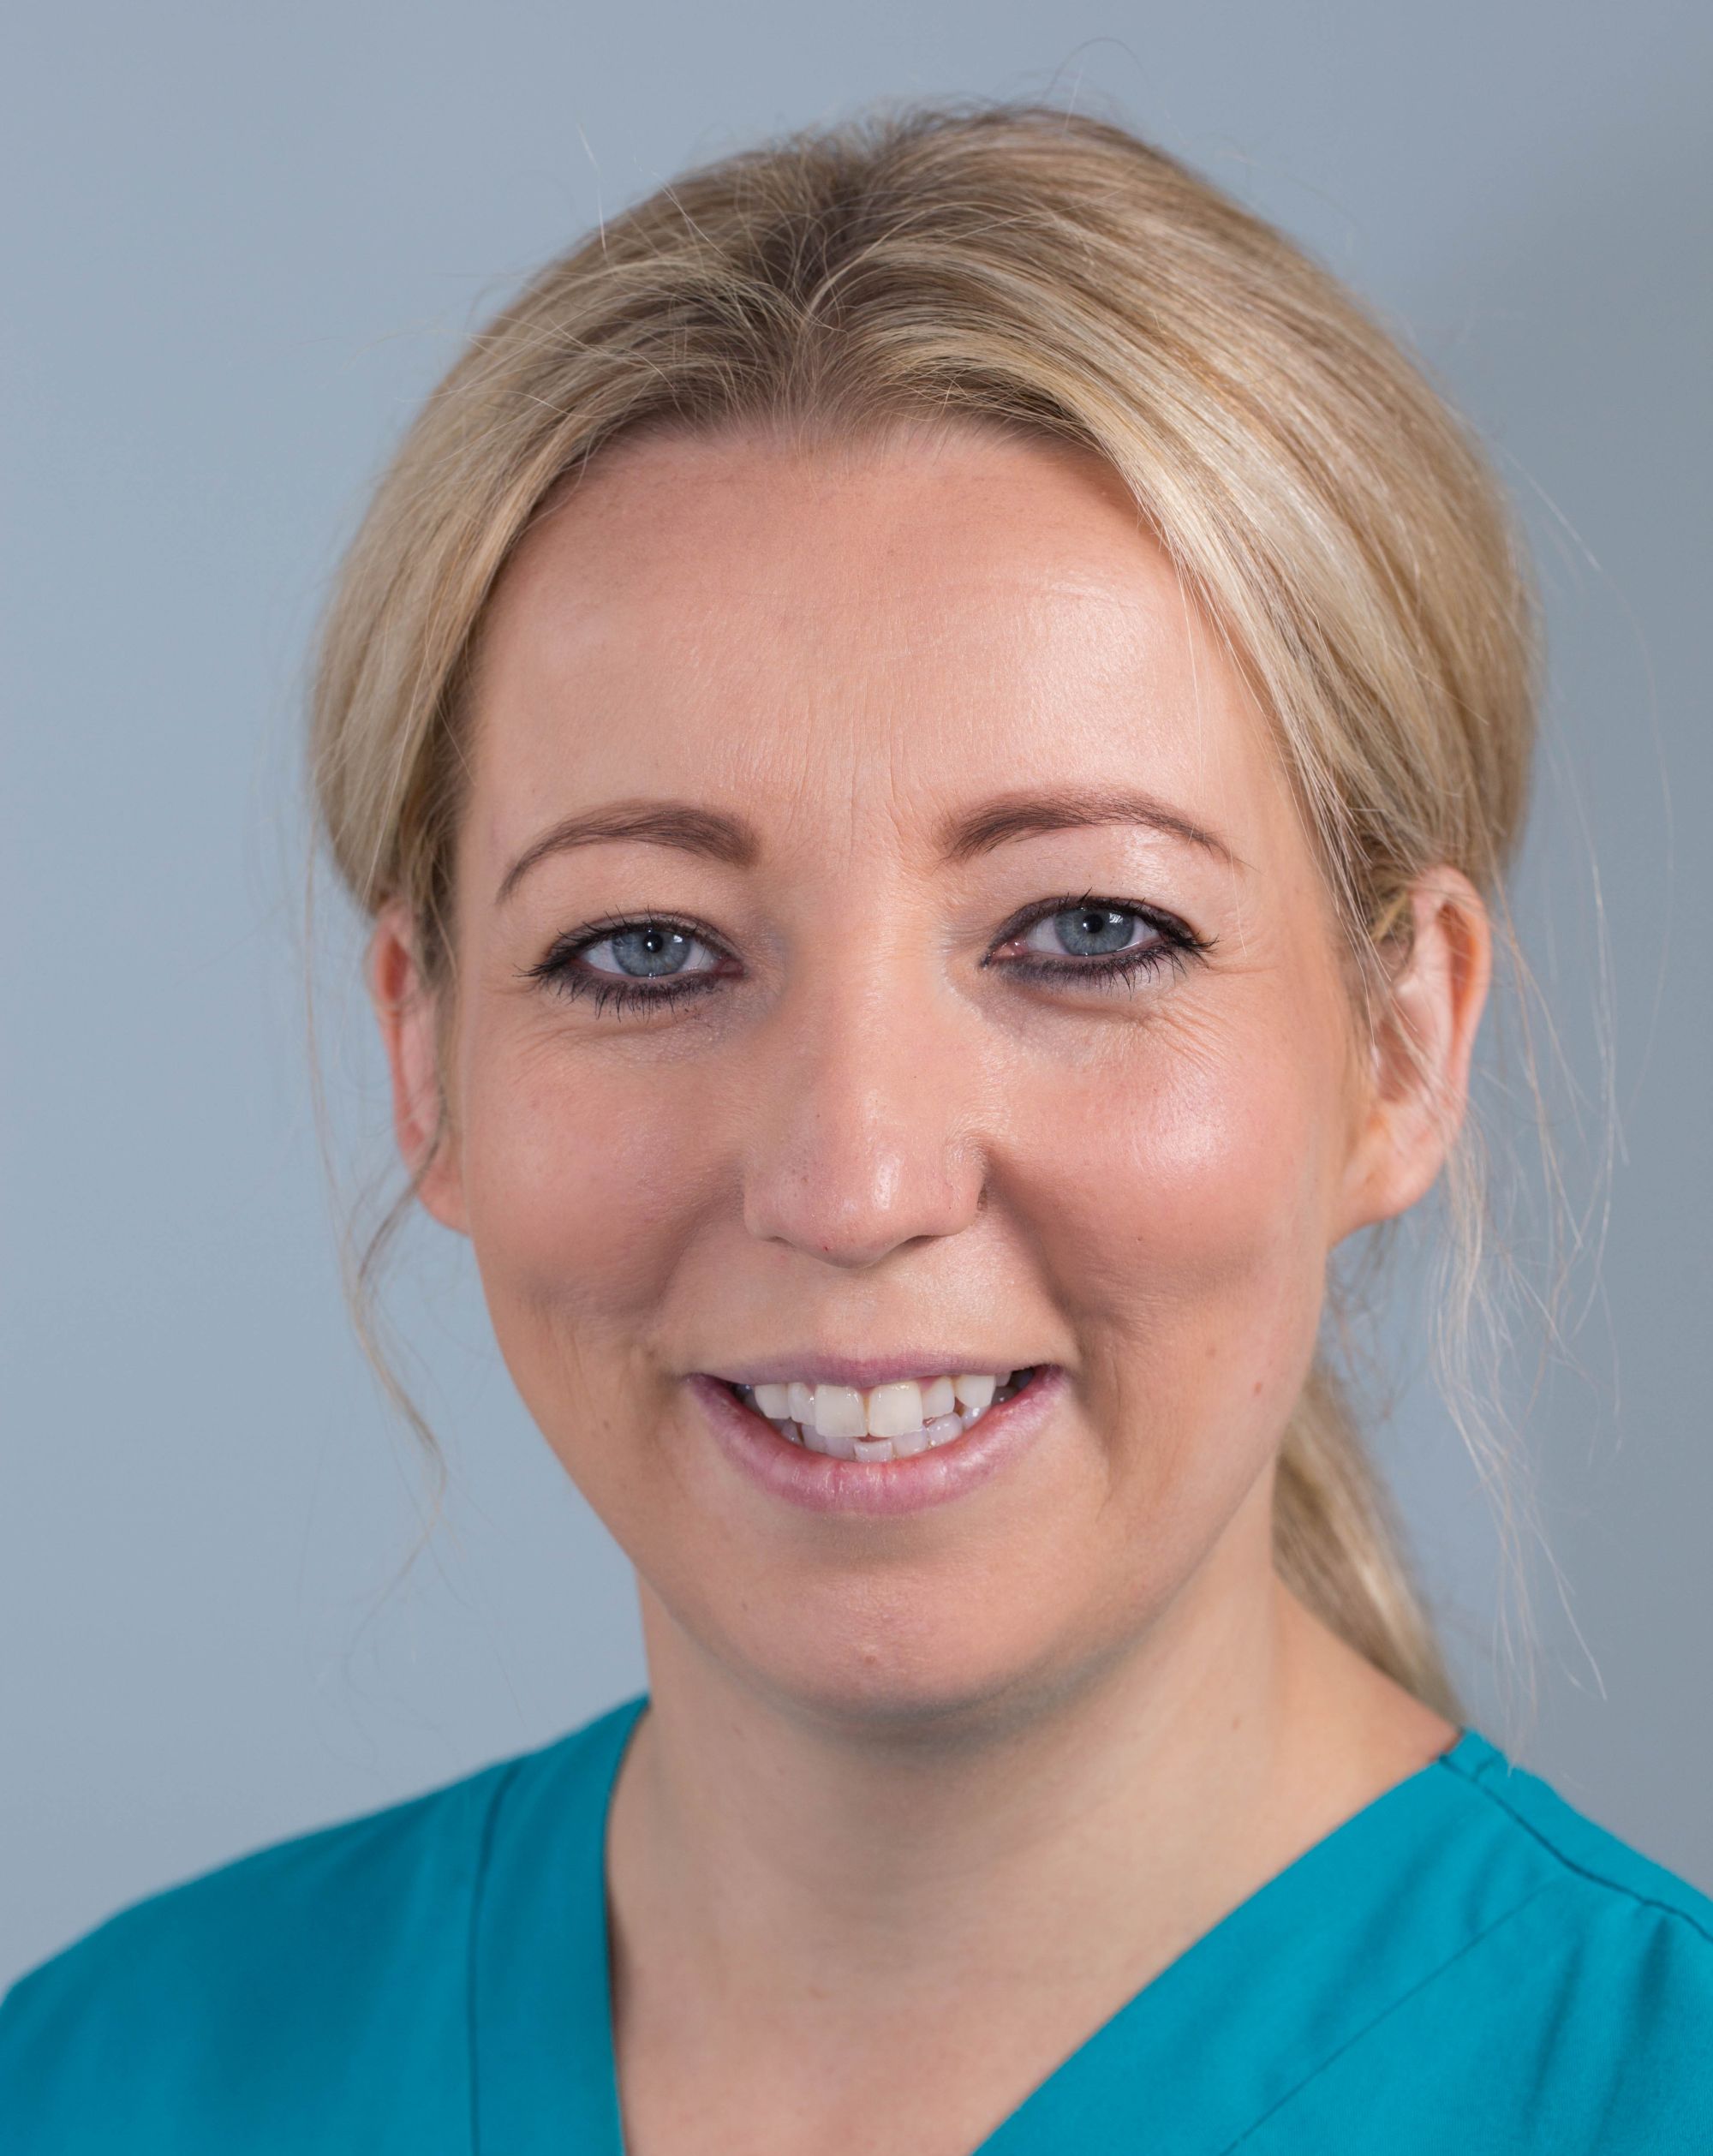 Congratulations to Sarah who has just passed her BDA Certificate in Dental Radiography! 